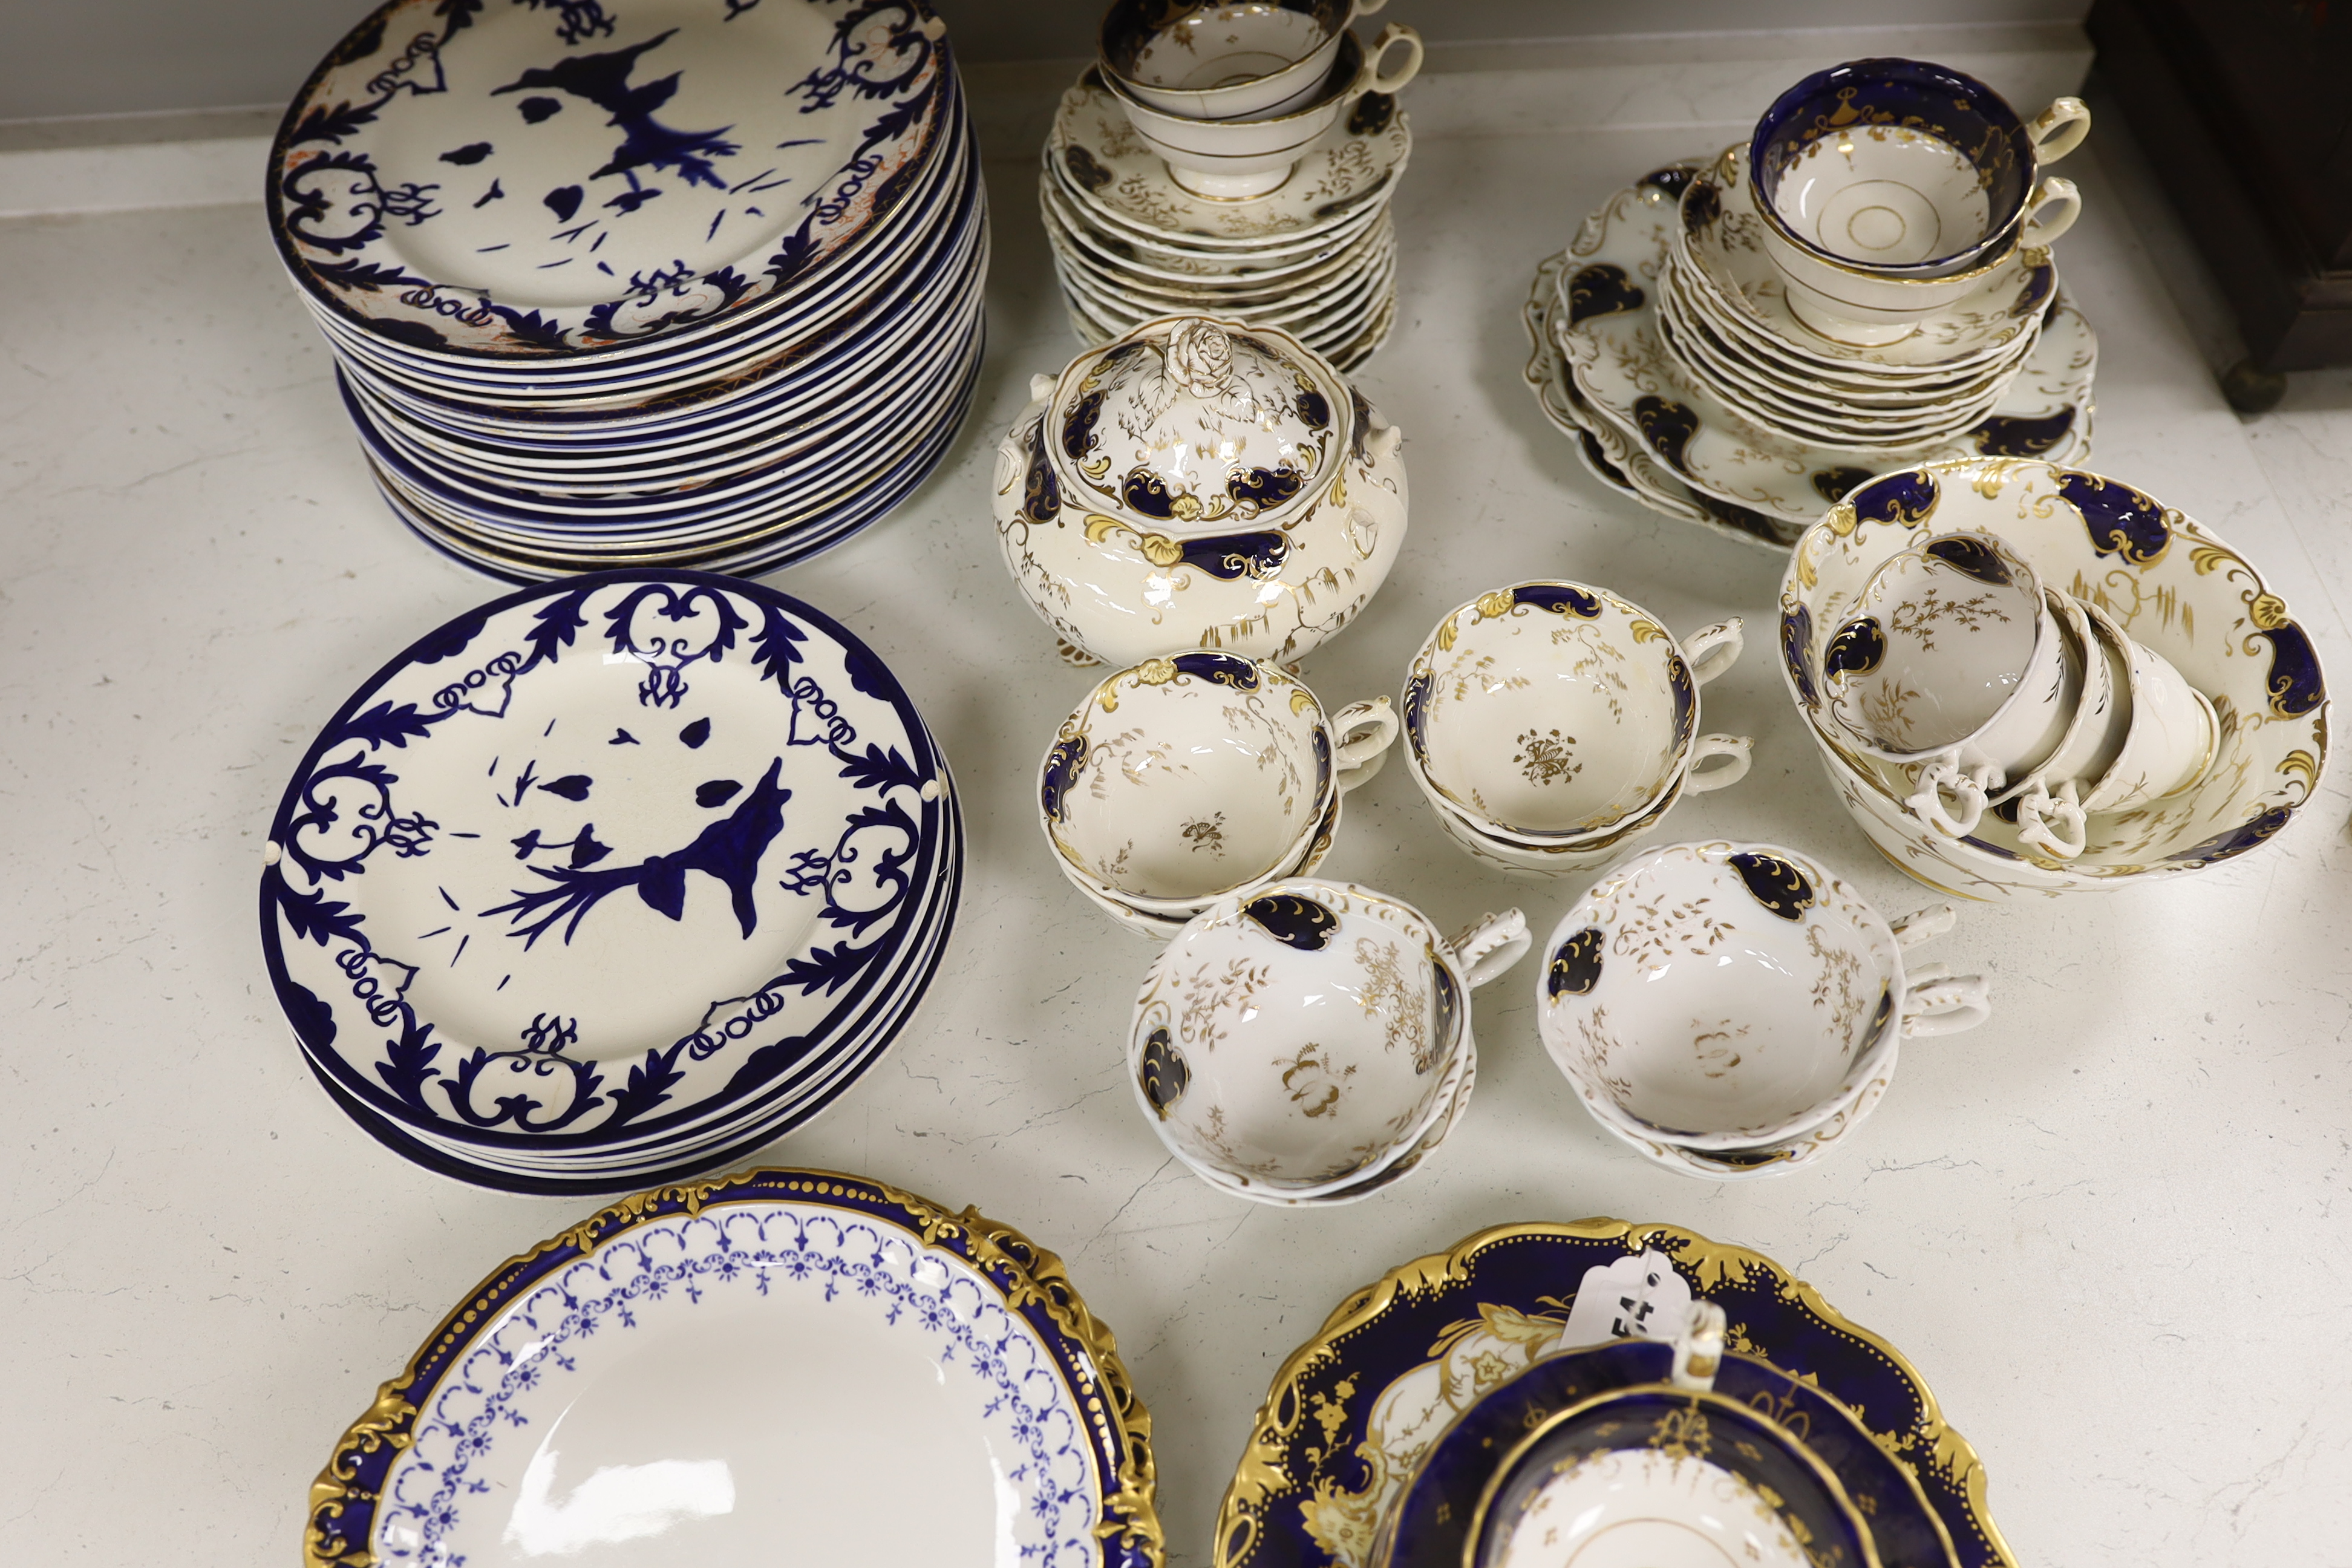 A Royal Crown Derby blue and gilt bordered part dessert service, together with a Victorian Staffordshire blue and gilt part tea service